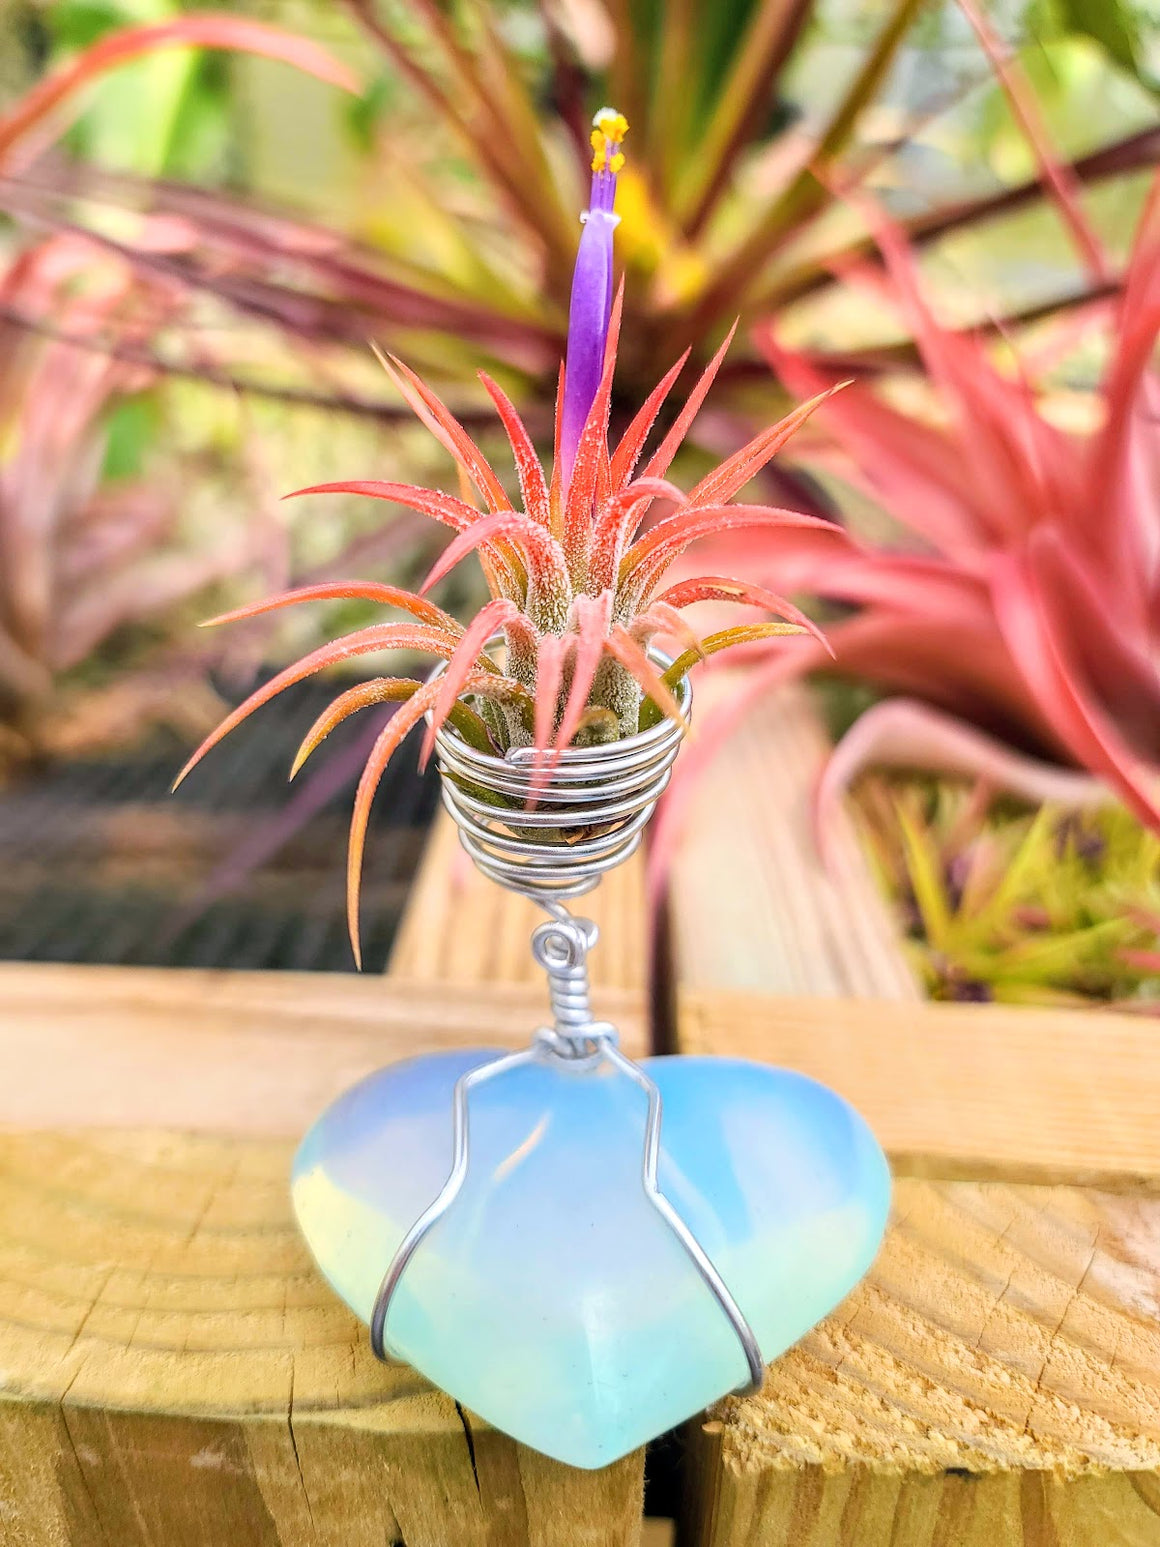 WYSIWYG Opalite Heart Air Plant Holder with Ionantha Mexican